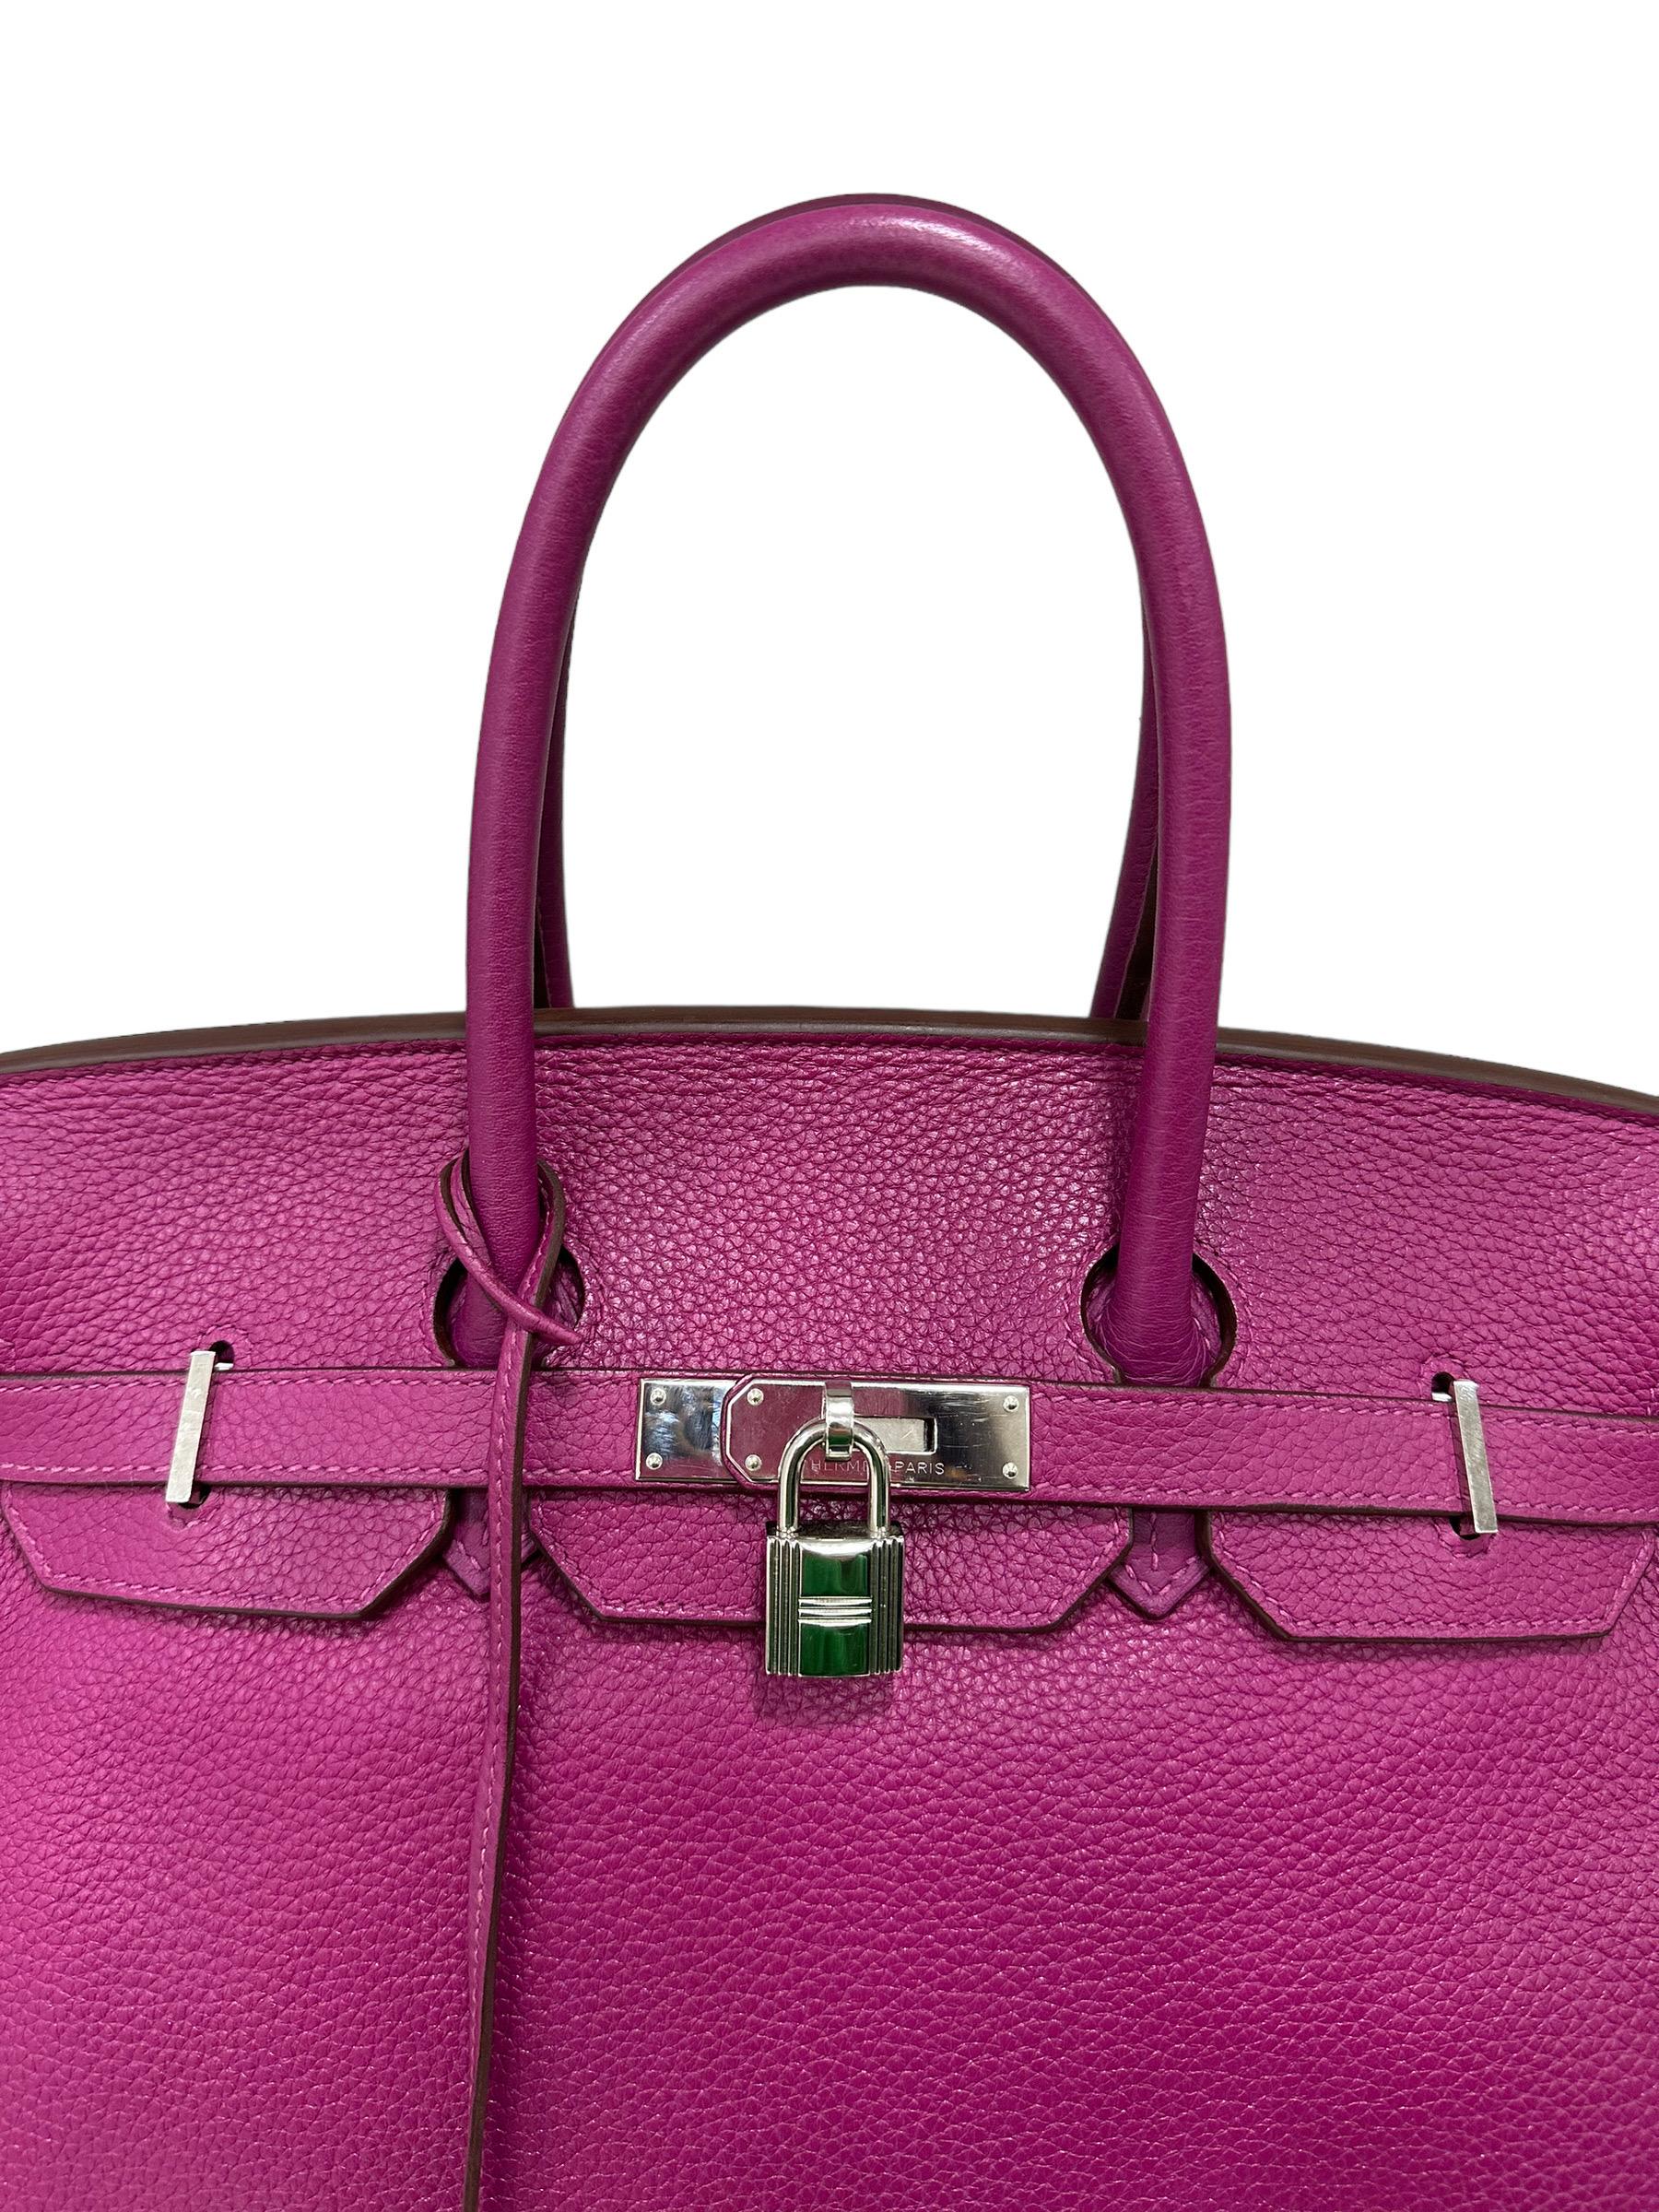 Bag signed Hermès, model Birkin, size 35, made in Courchevel leather, very soft to the touch with large grain, in the Tosca colour. Equipped with a flap with interlocking closure with horizontal band, padlock and keys. Internally lined in leather of